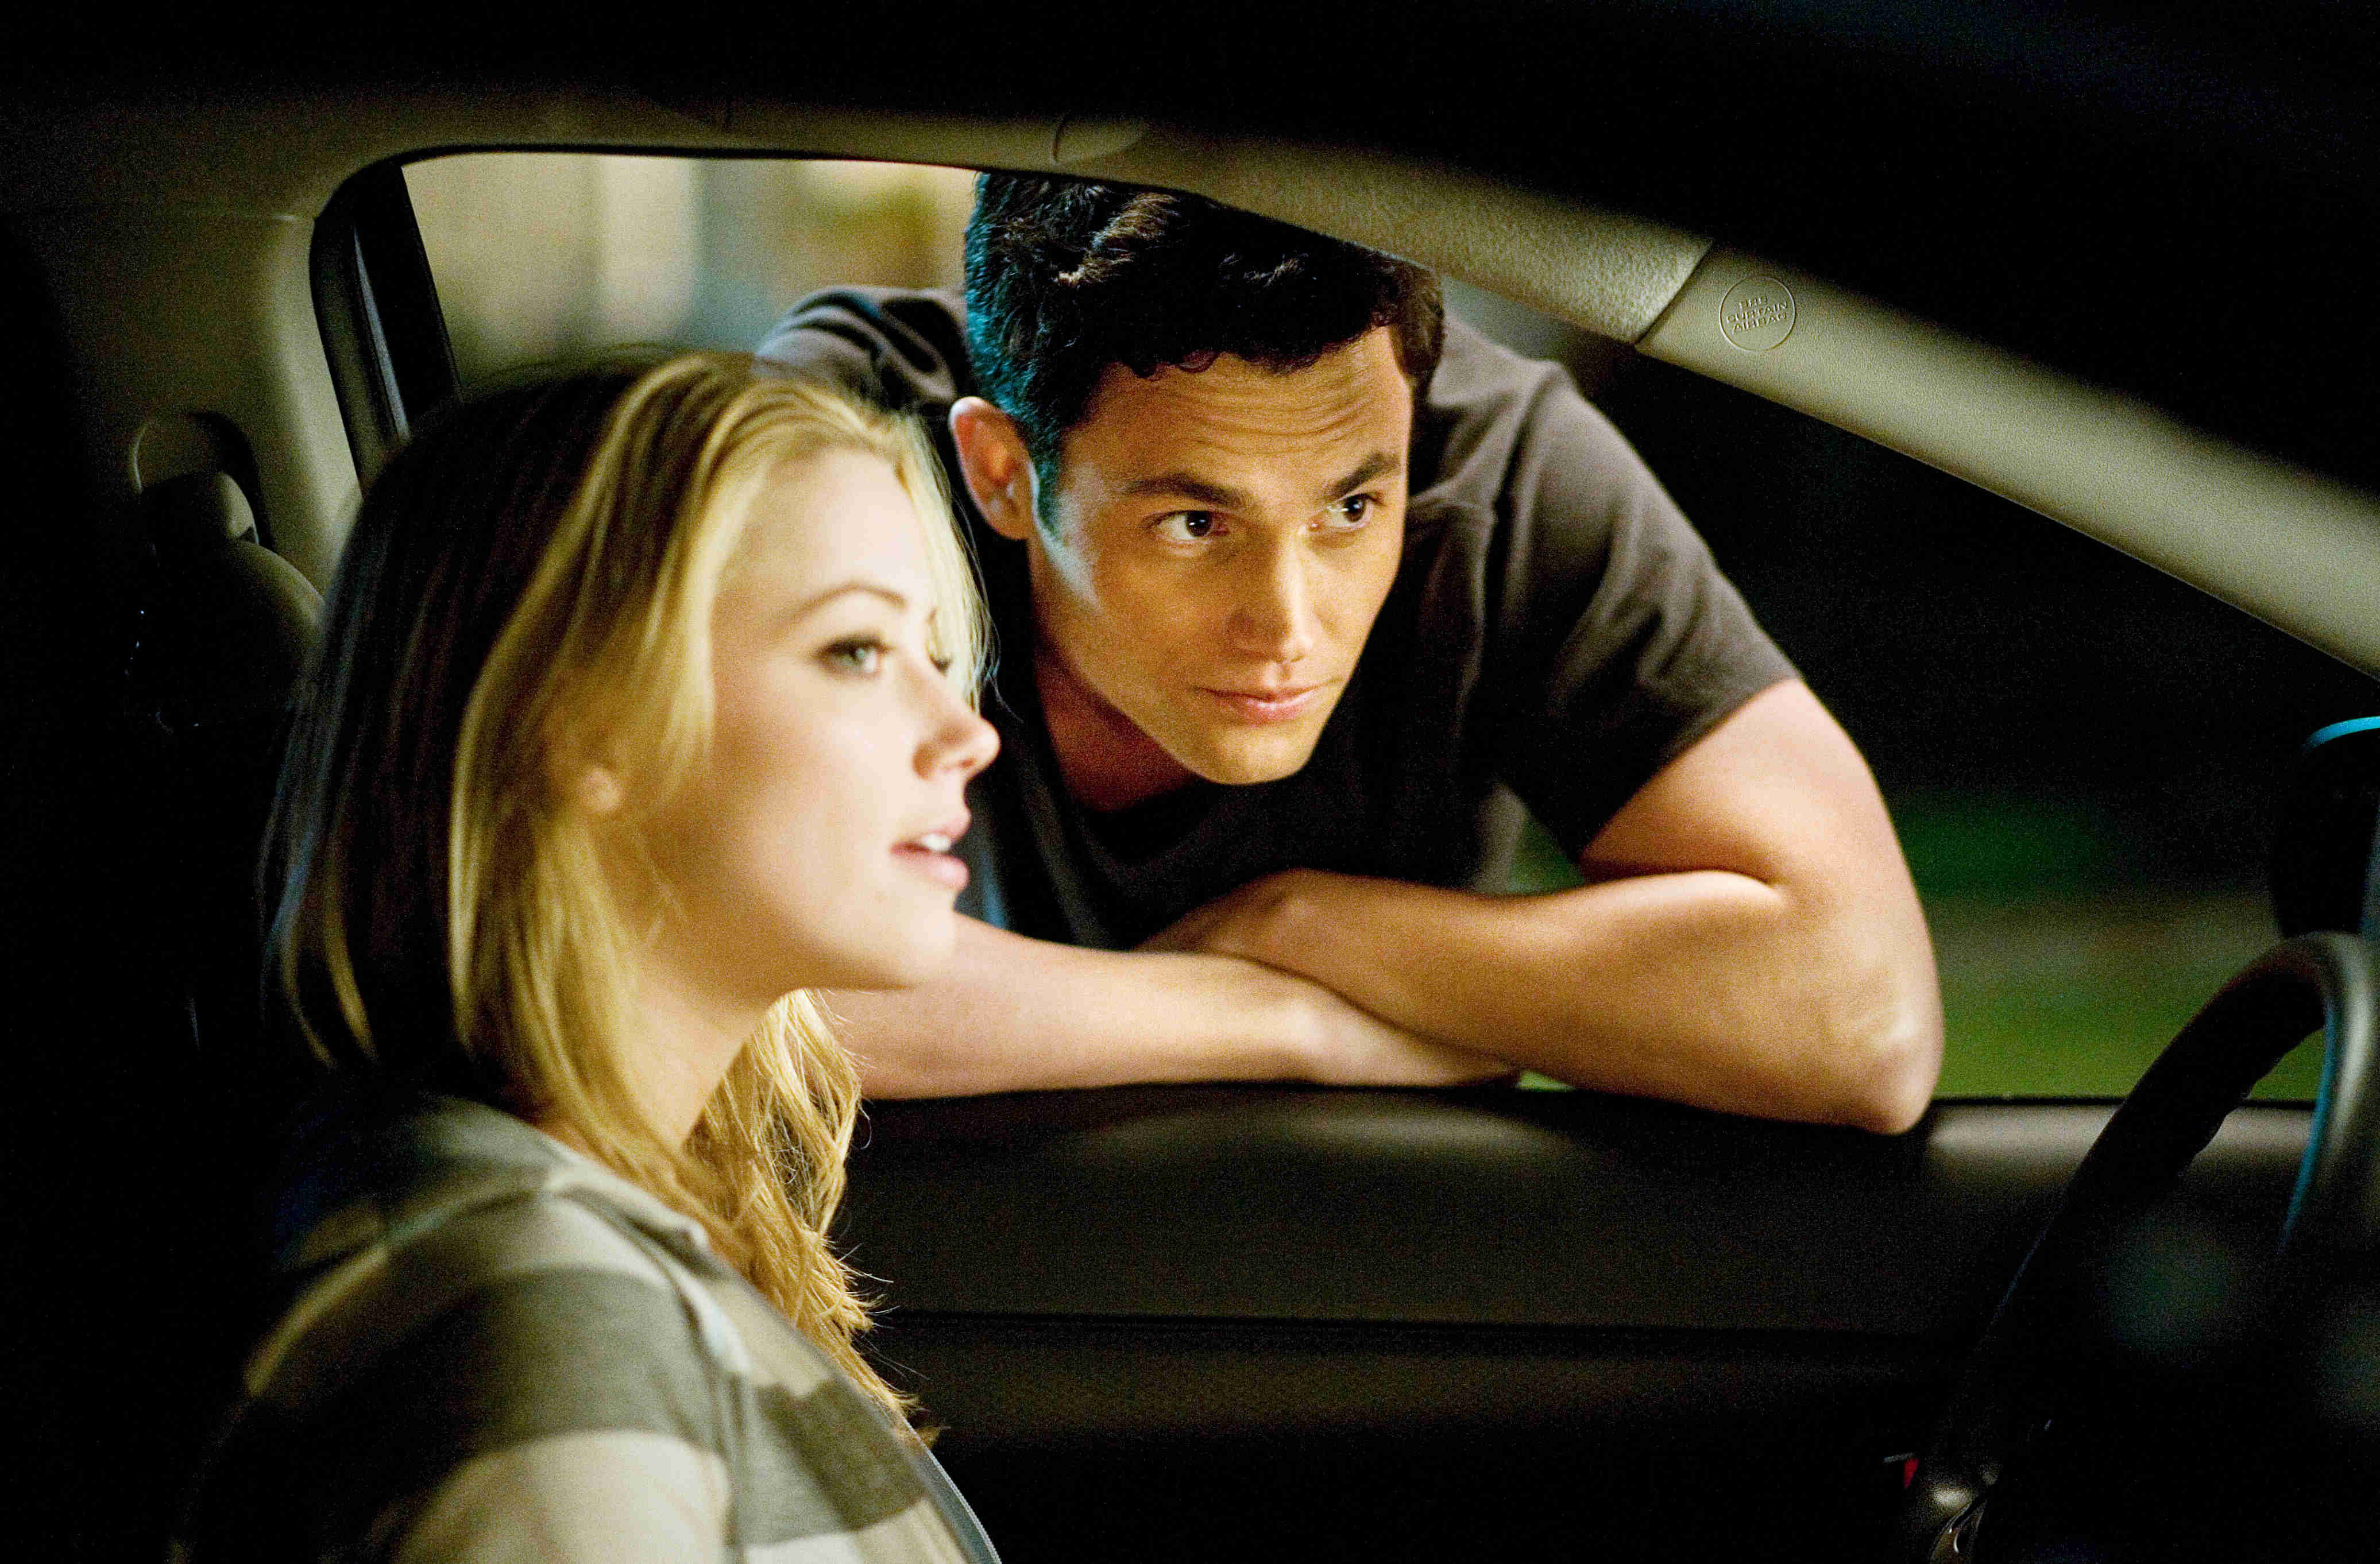 Amber Heard stars as Kelly and Penn Badgley stars as Michael in Screen Gems' The Stepfather (2009). Photo credit by Chuck Zlotnick.